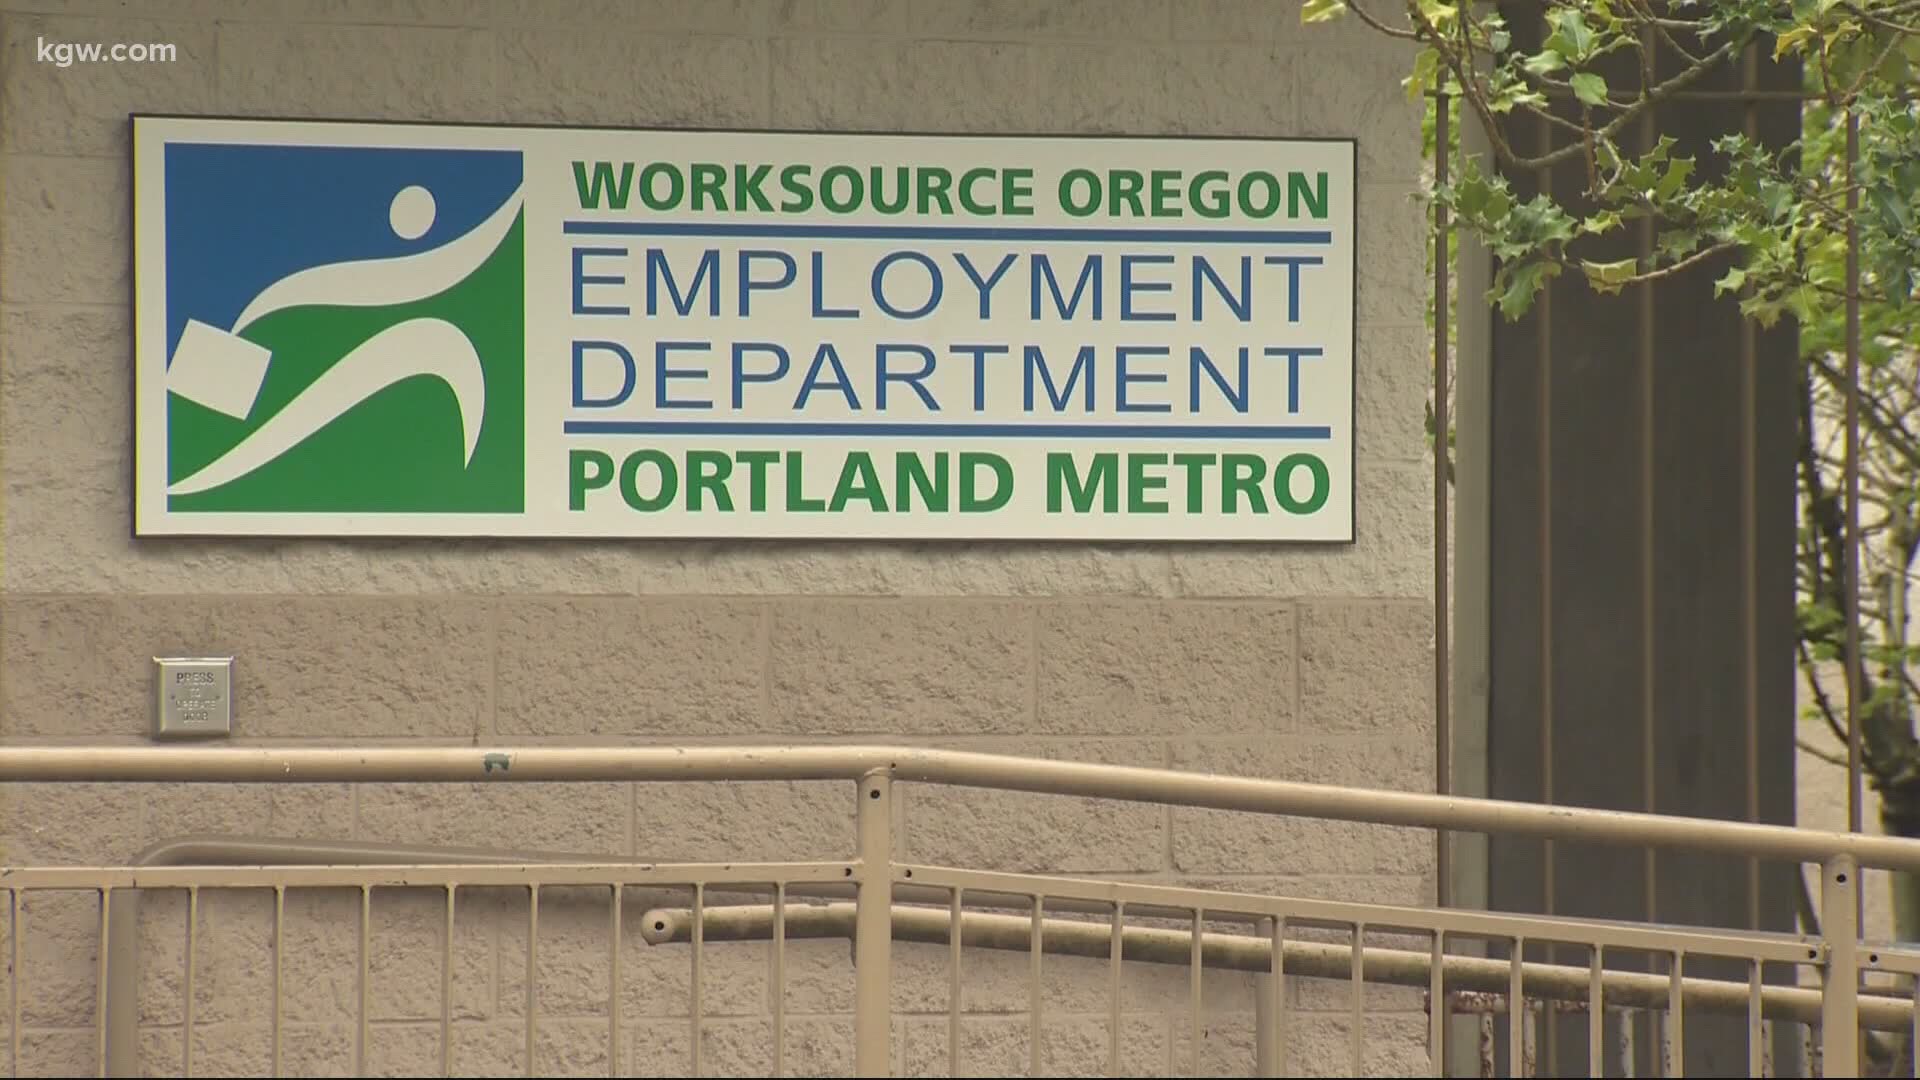 It's been four months since Oregon shut down, leaving thousands unemployed. Many are still waiting for their unemployment benefits.